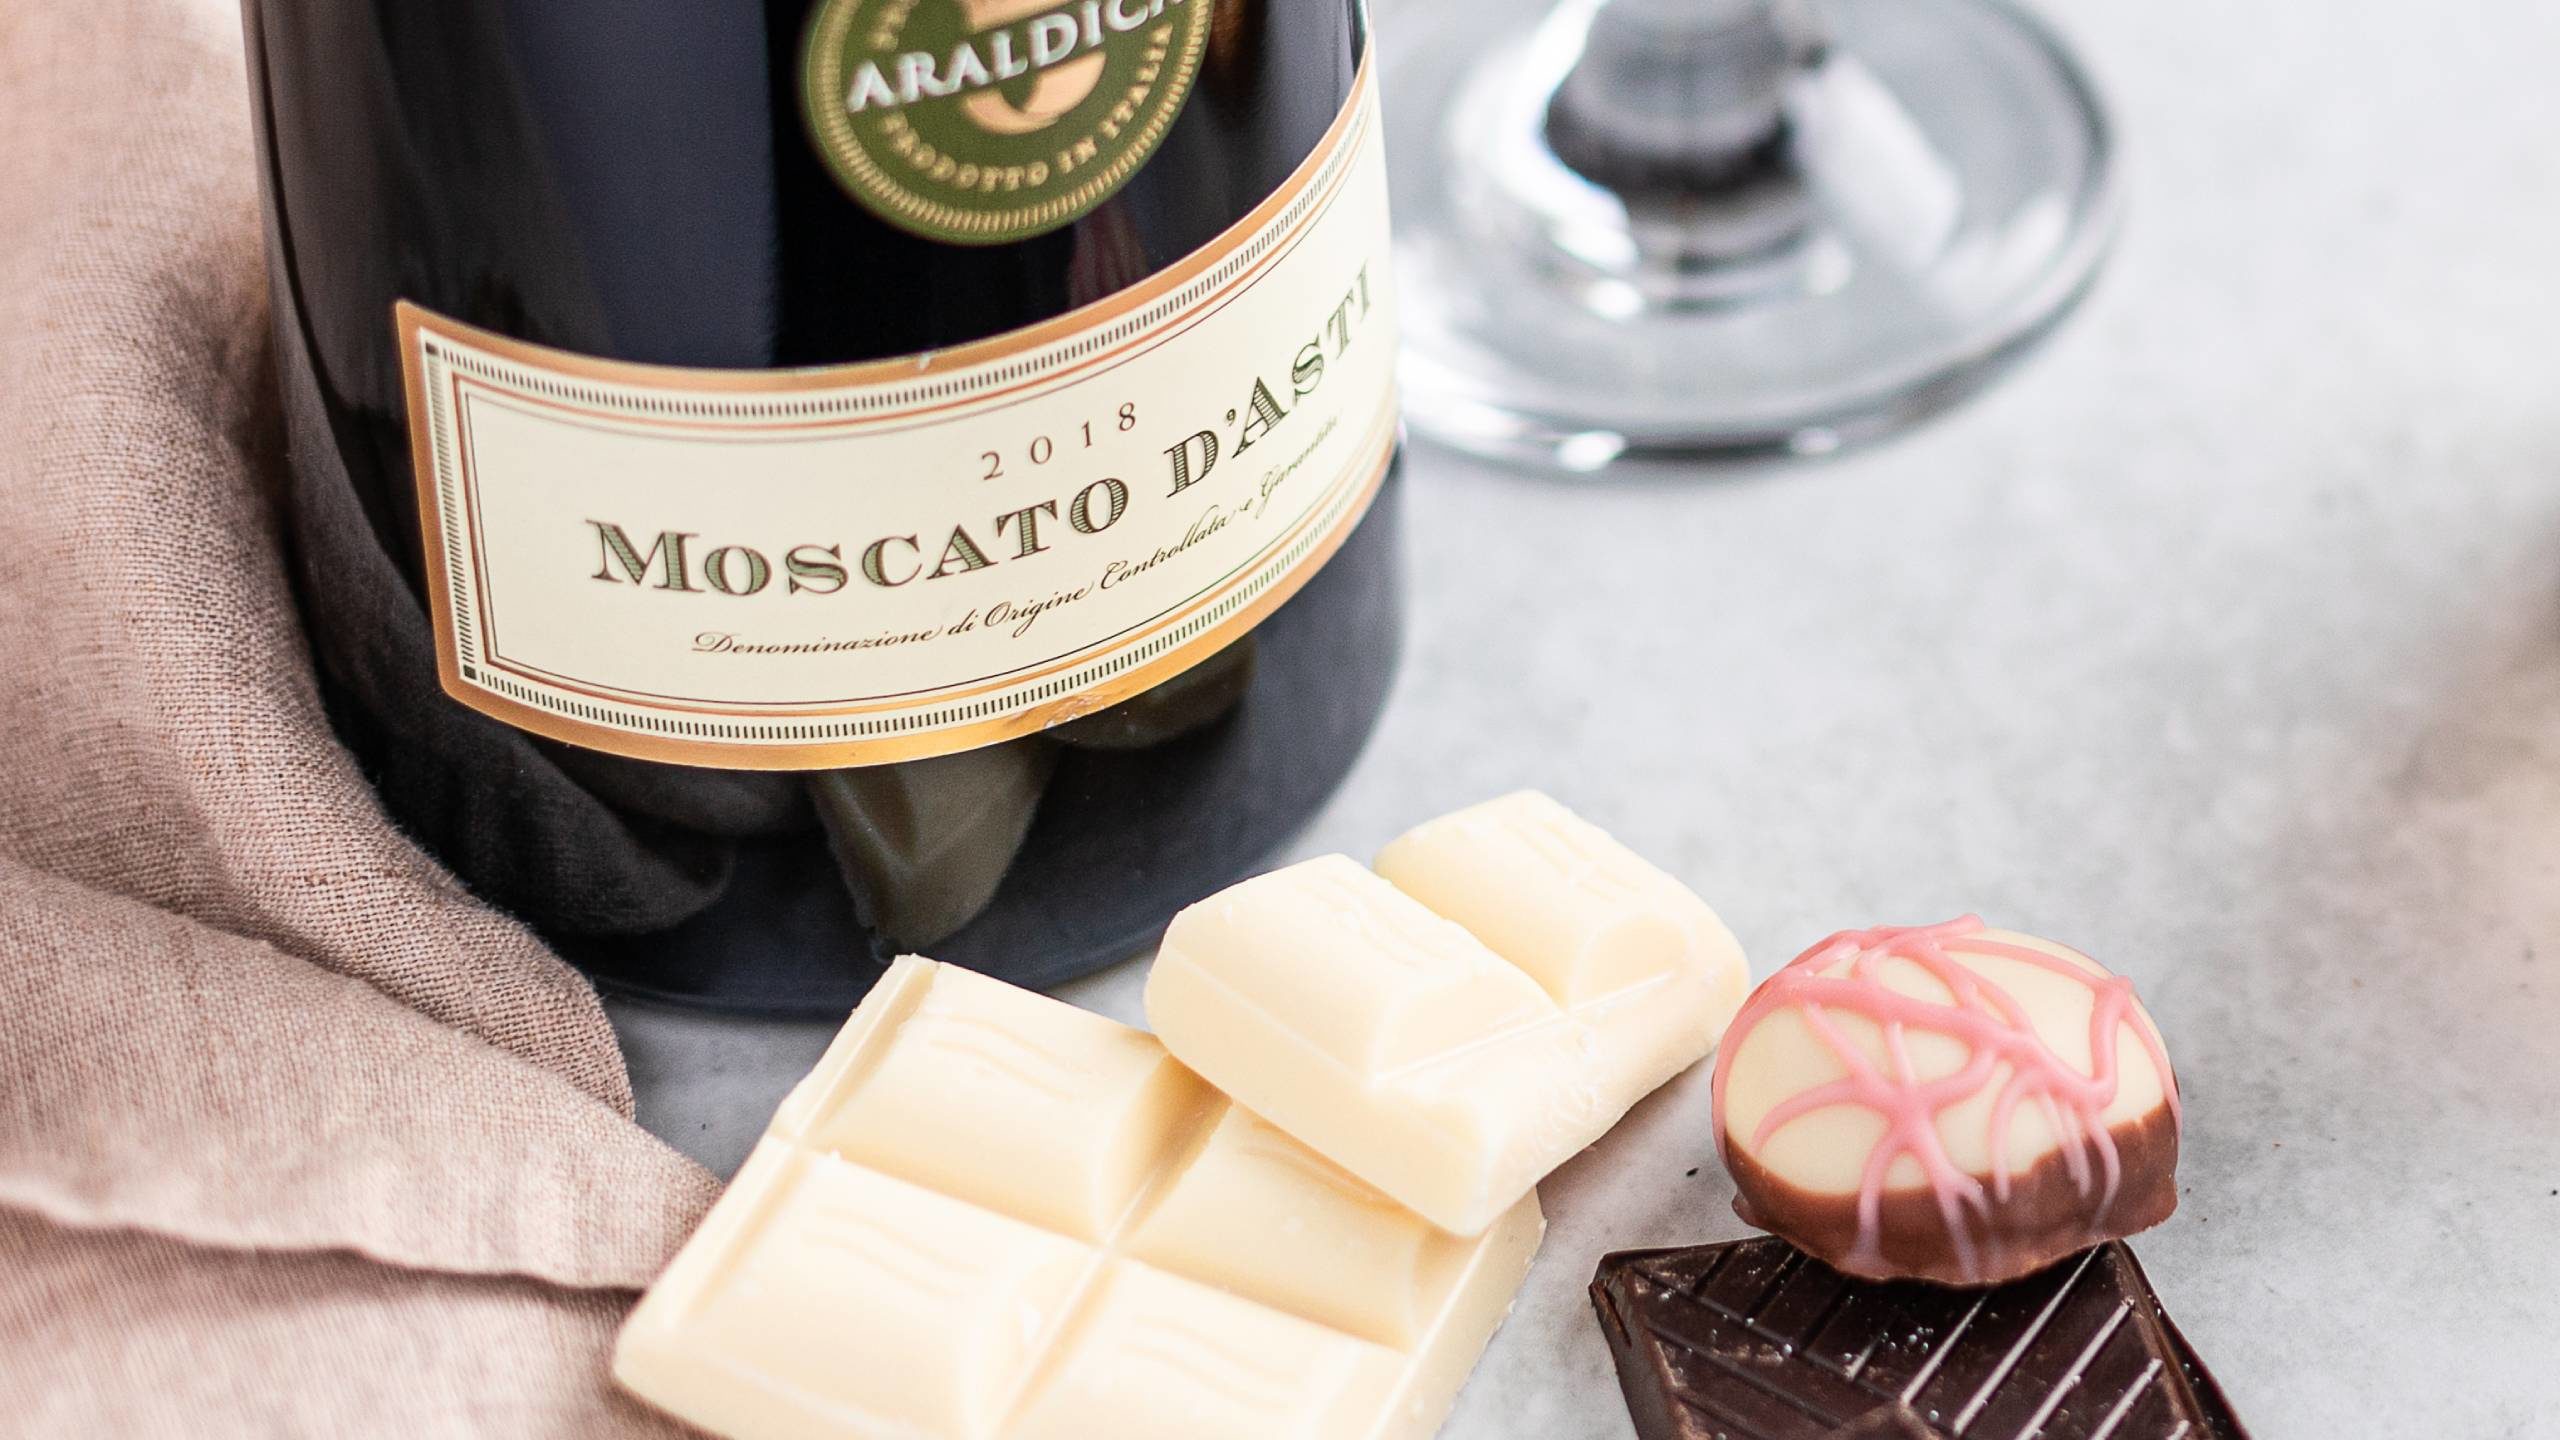 Moscato d'Asti and flute with chocolates